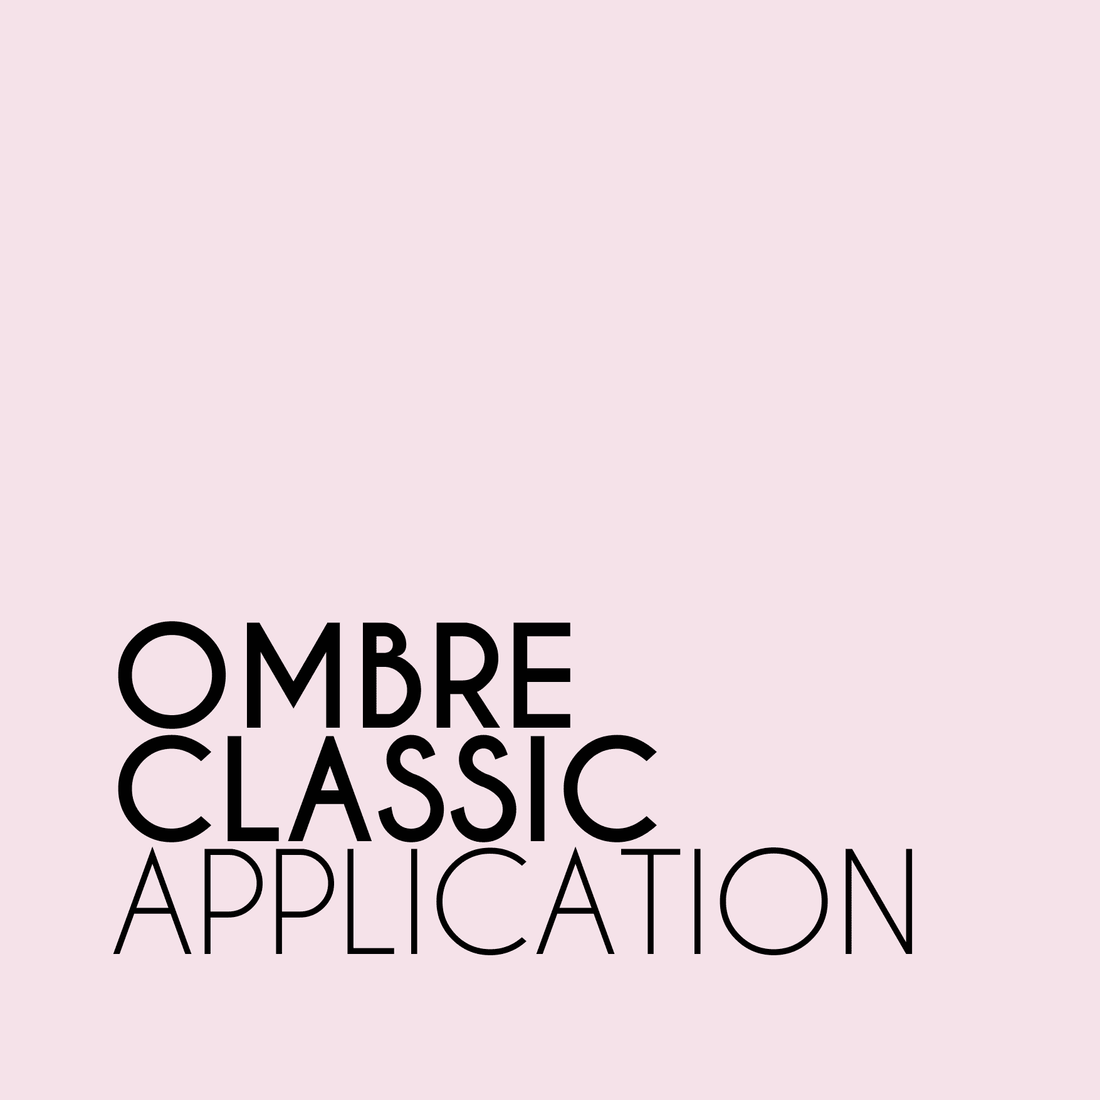 Ombre Classic Application